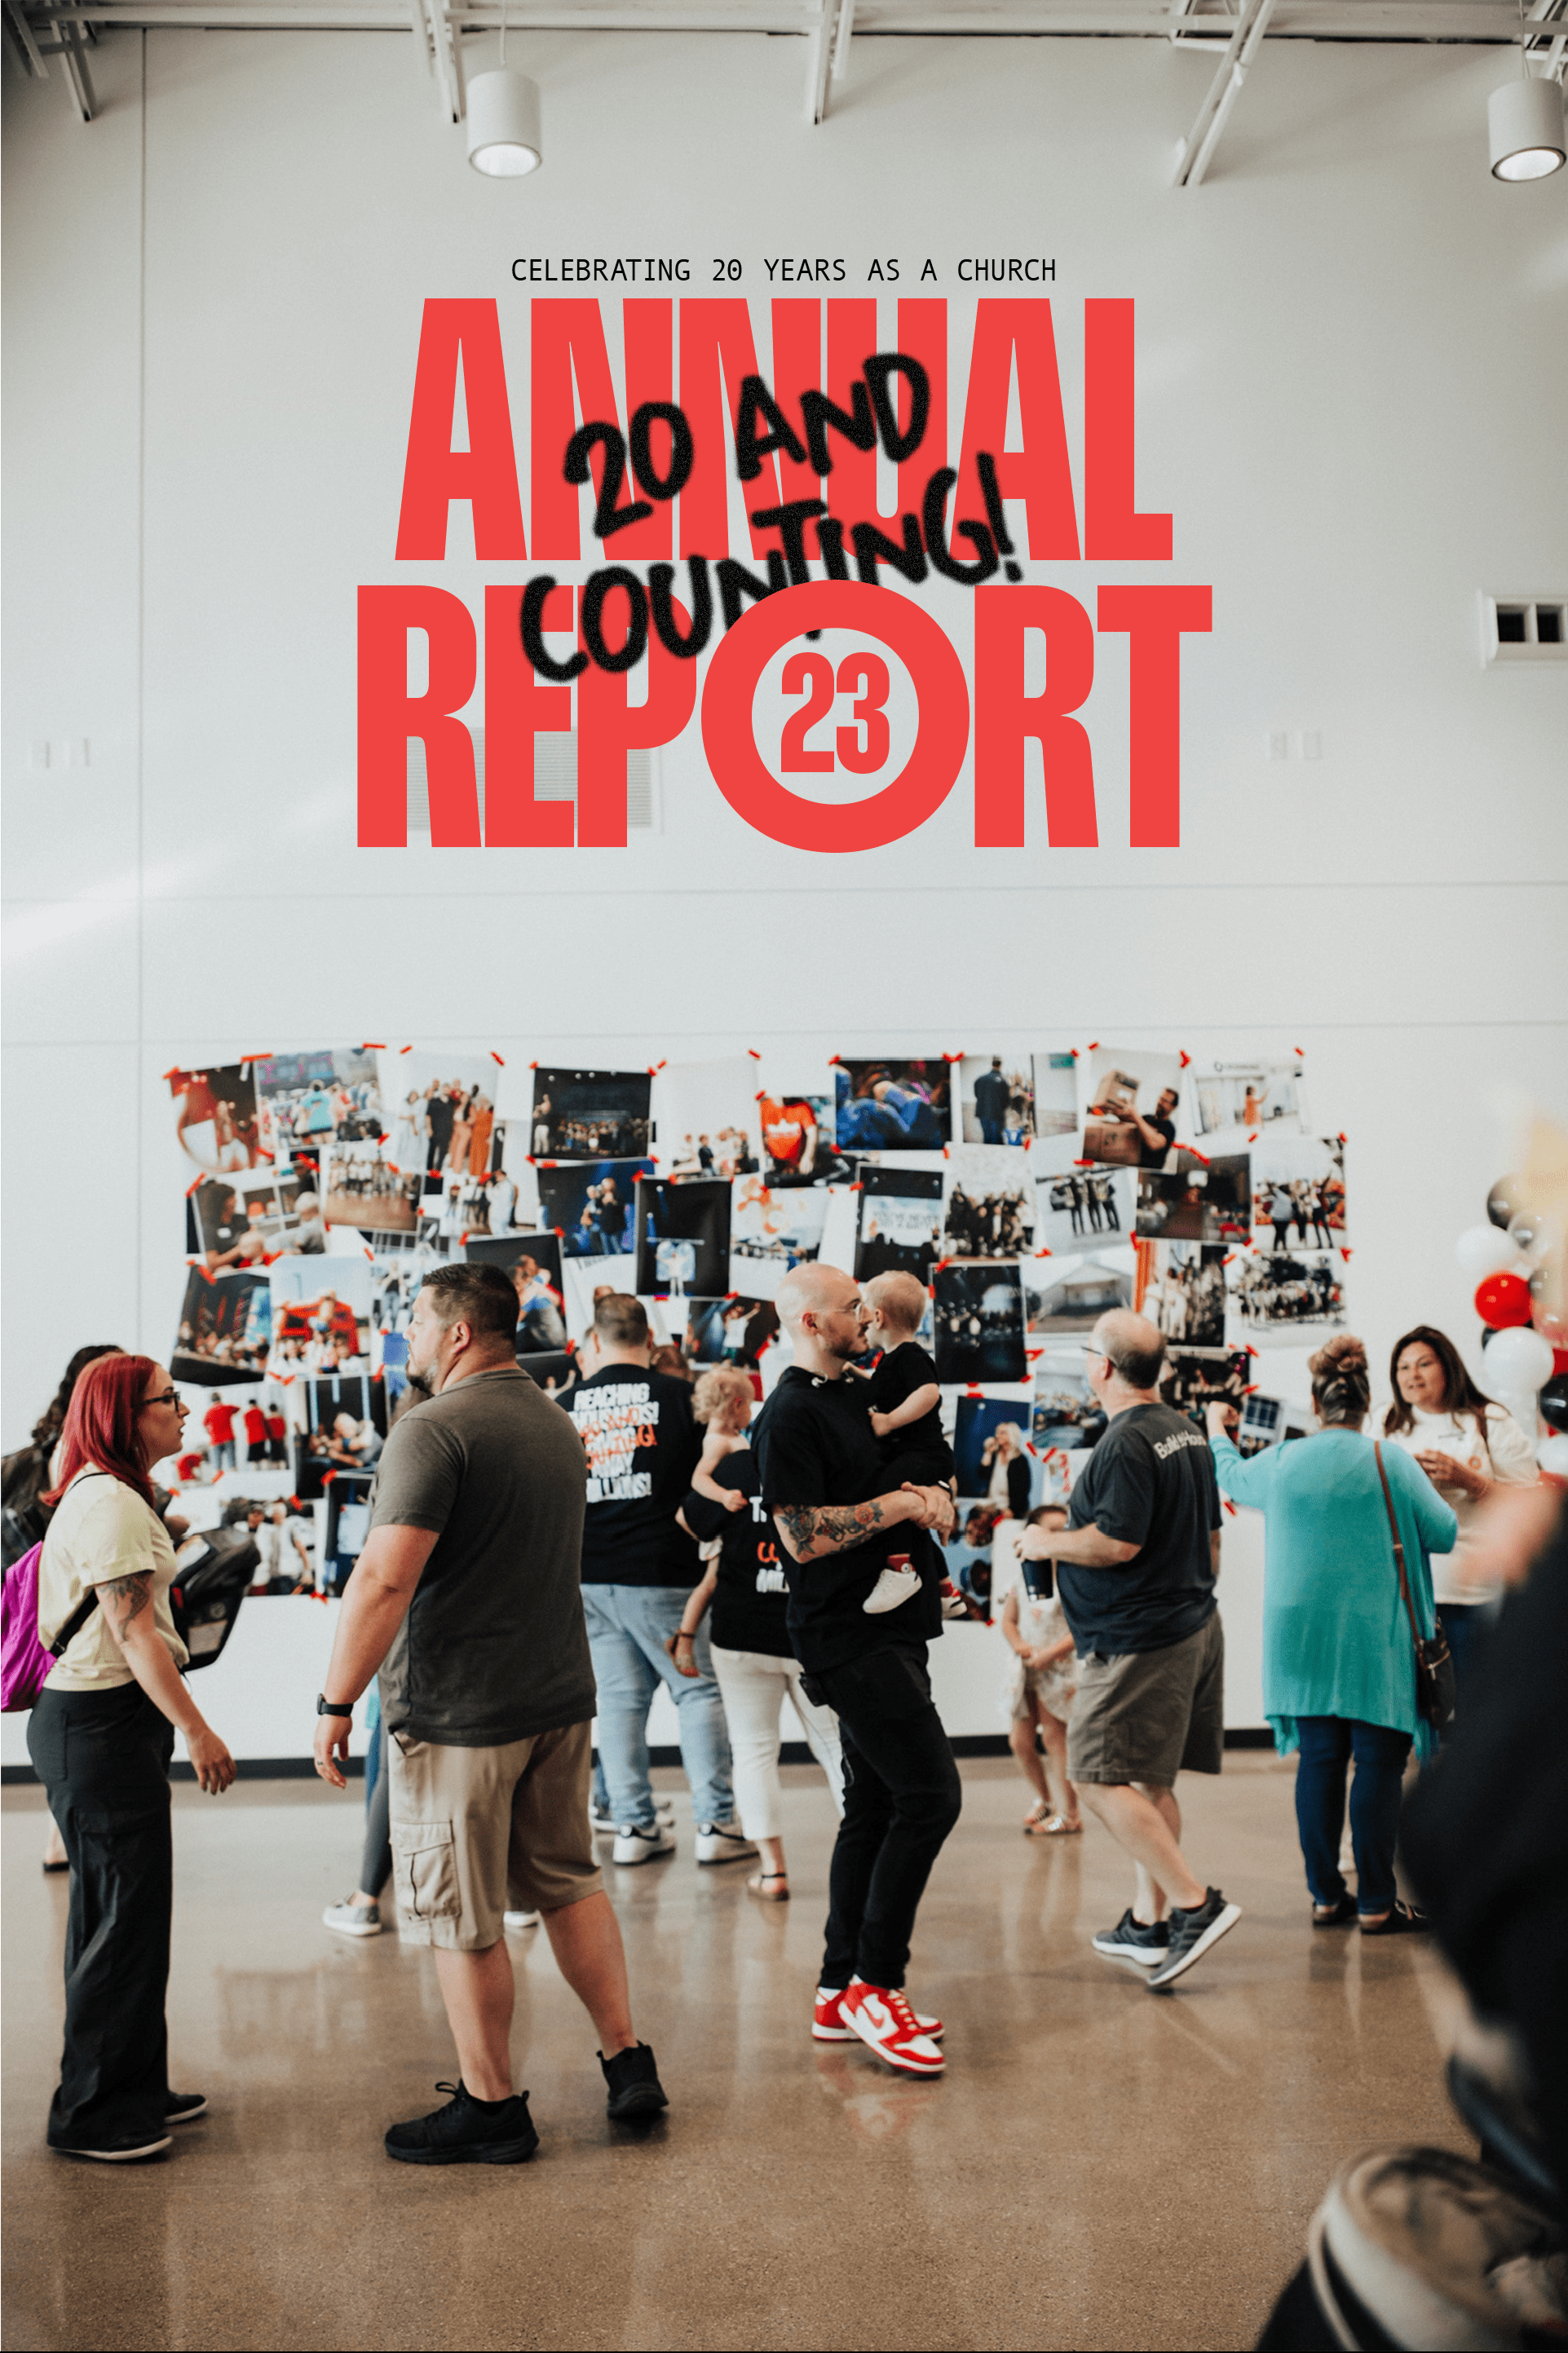 collage of people overlayed with Annual Report 2023, celebrating 20 years as a church